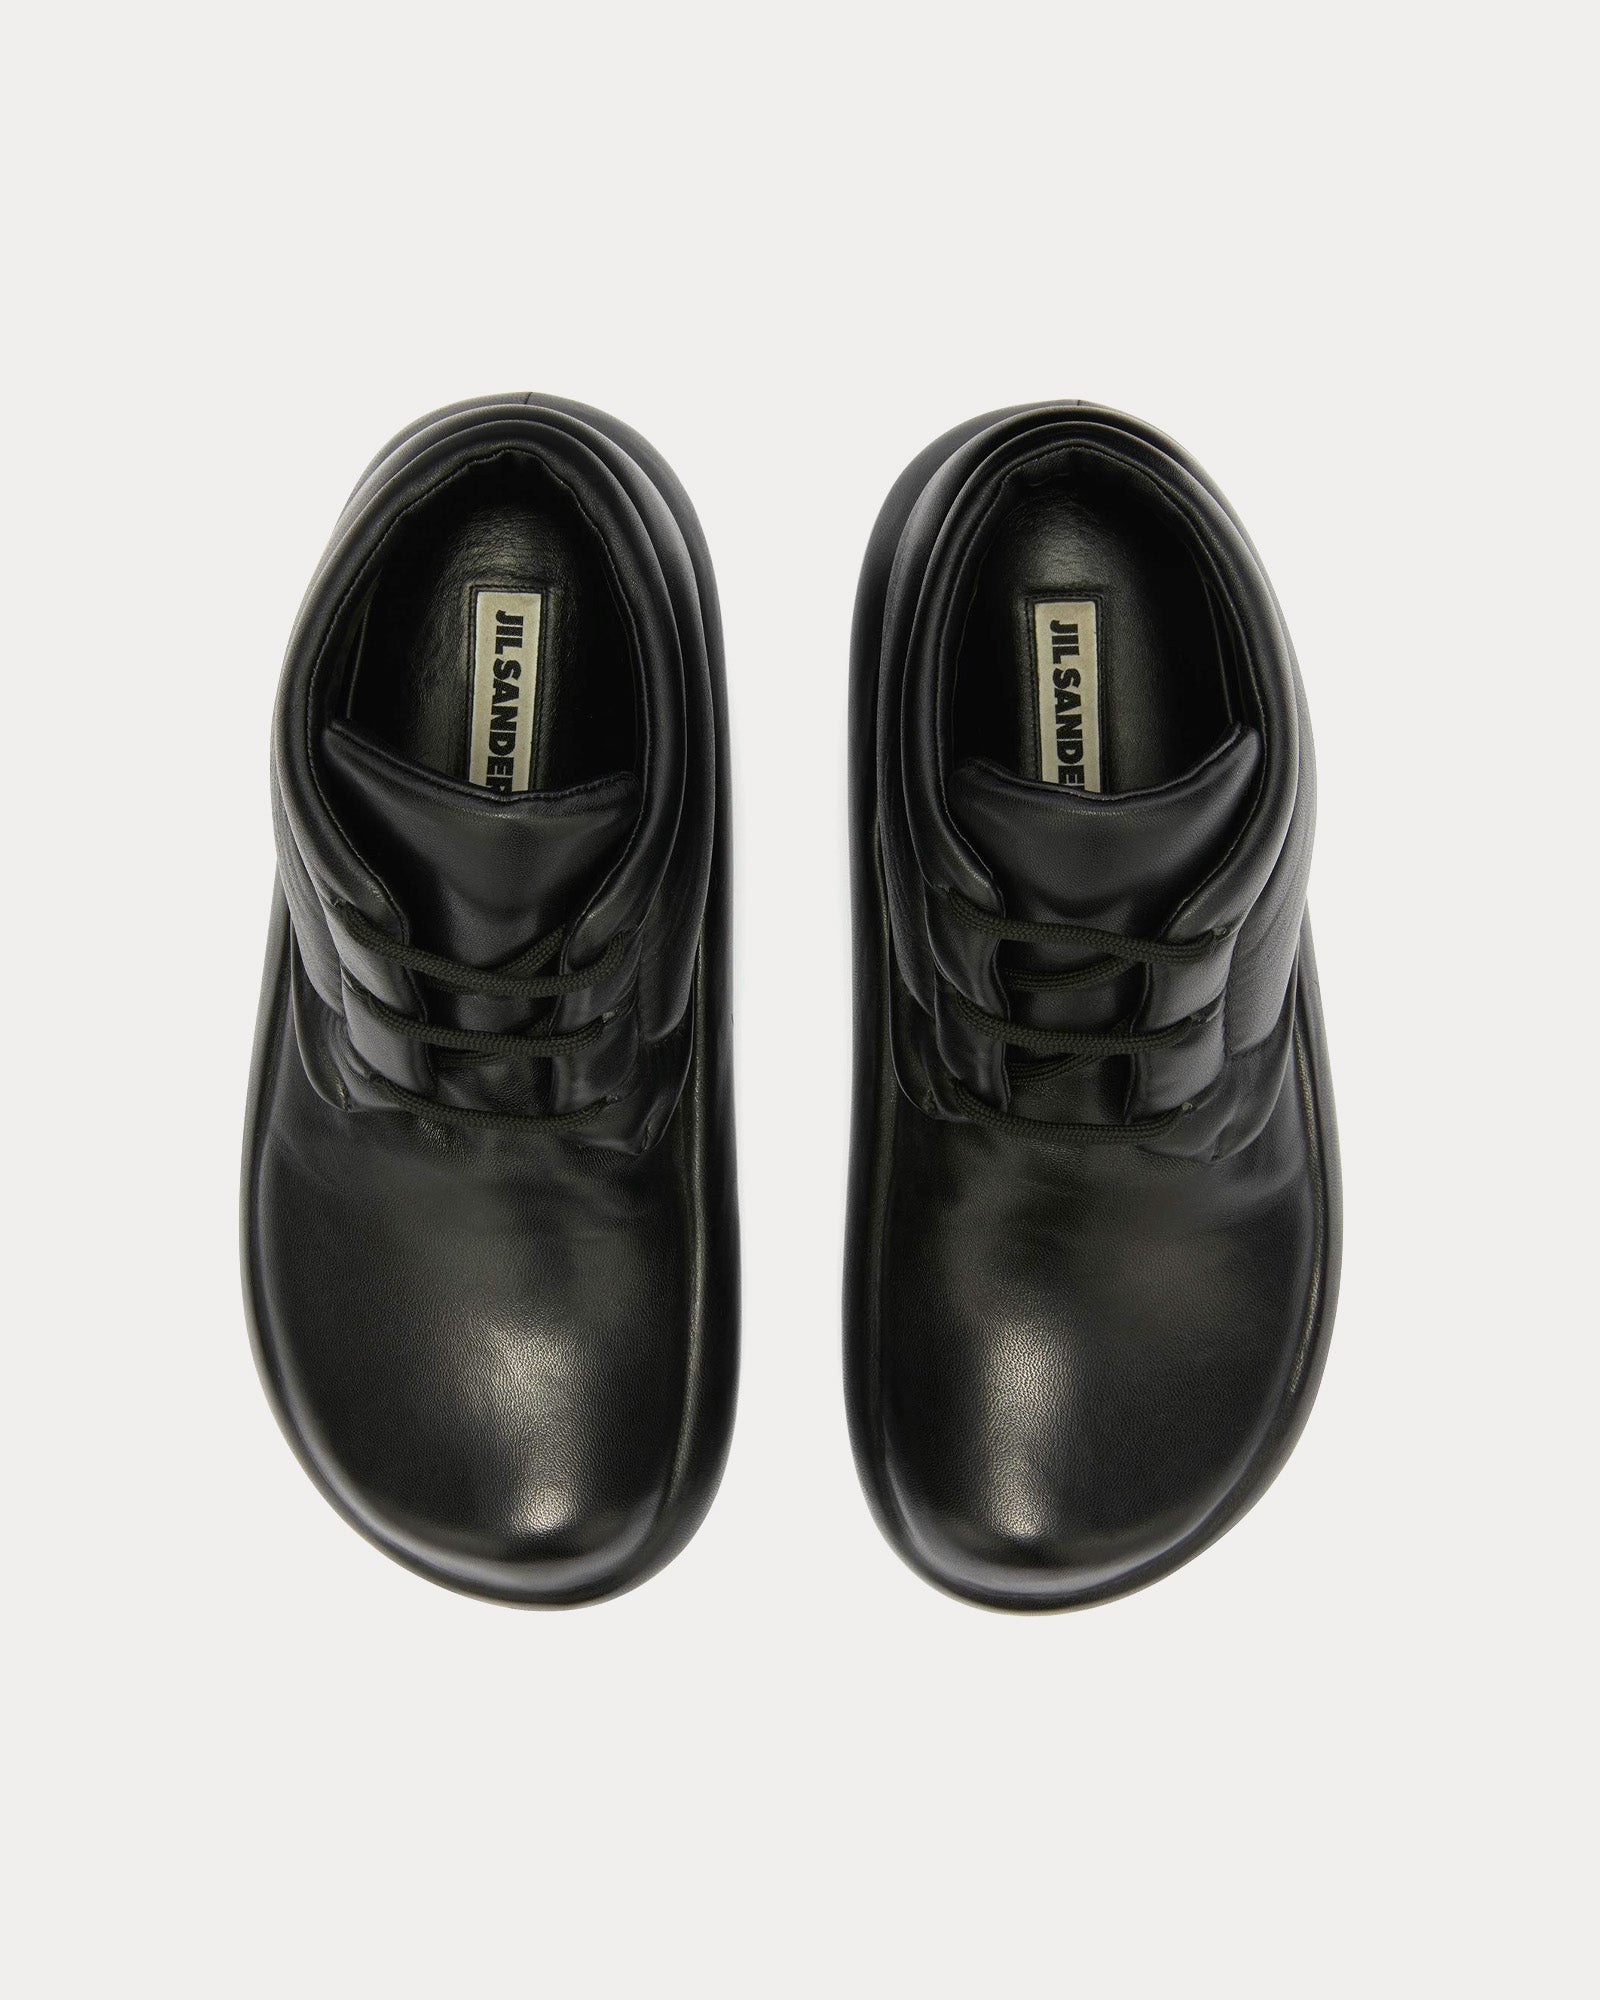 Jil Sander - Padded Lace-Up Leather Black High Top Sneakers